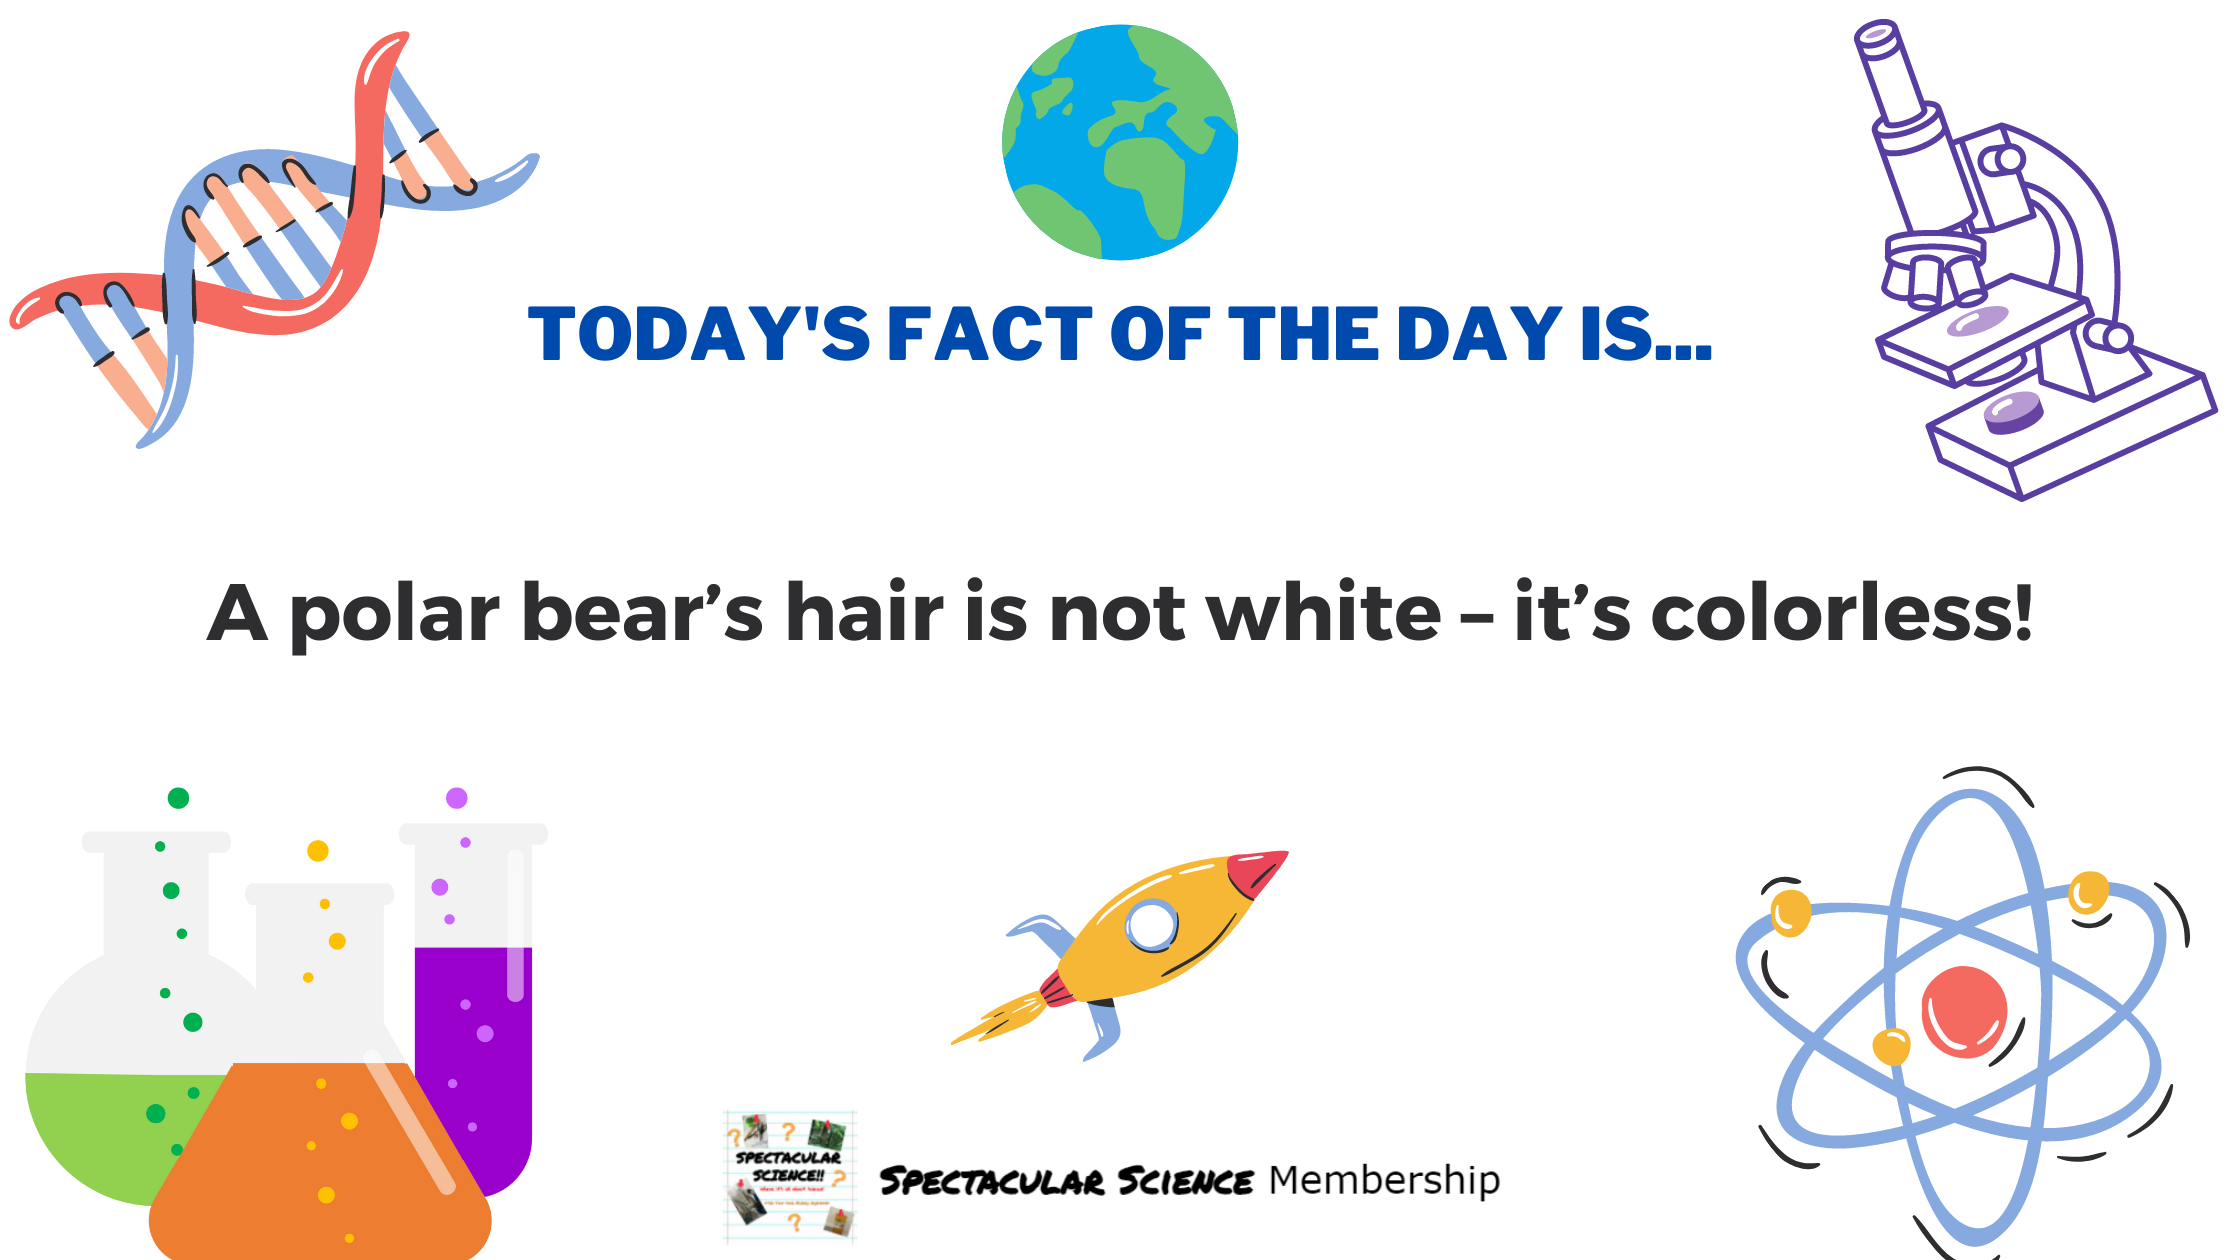 Fact of the Day Image Feb. 25th